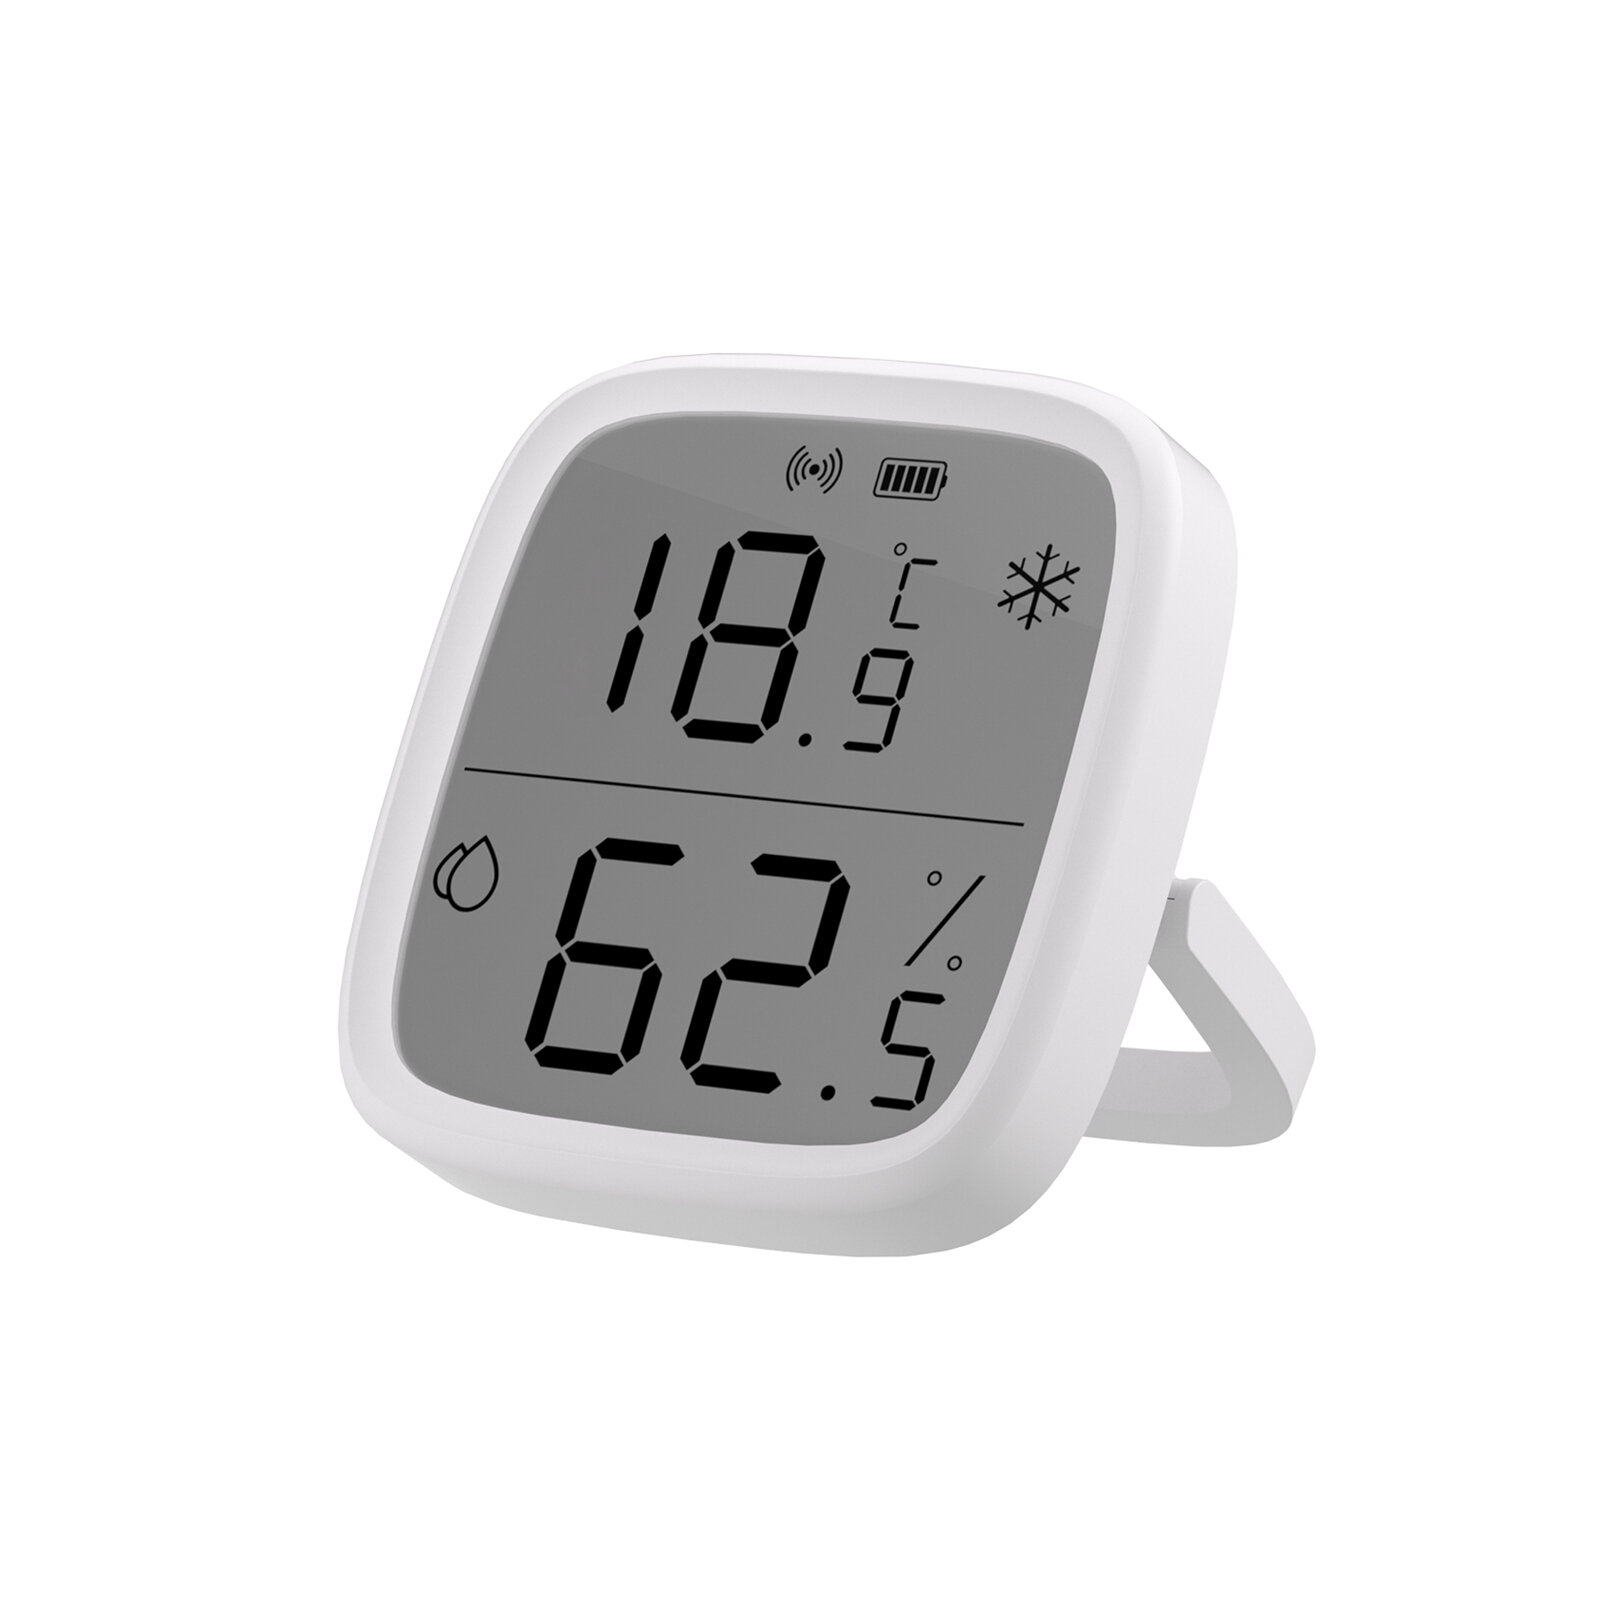 best price,sonoff,snzb,02d,lcd,smart,temperature,humidity,sensor,discount